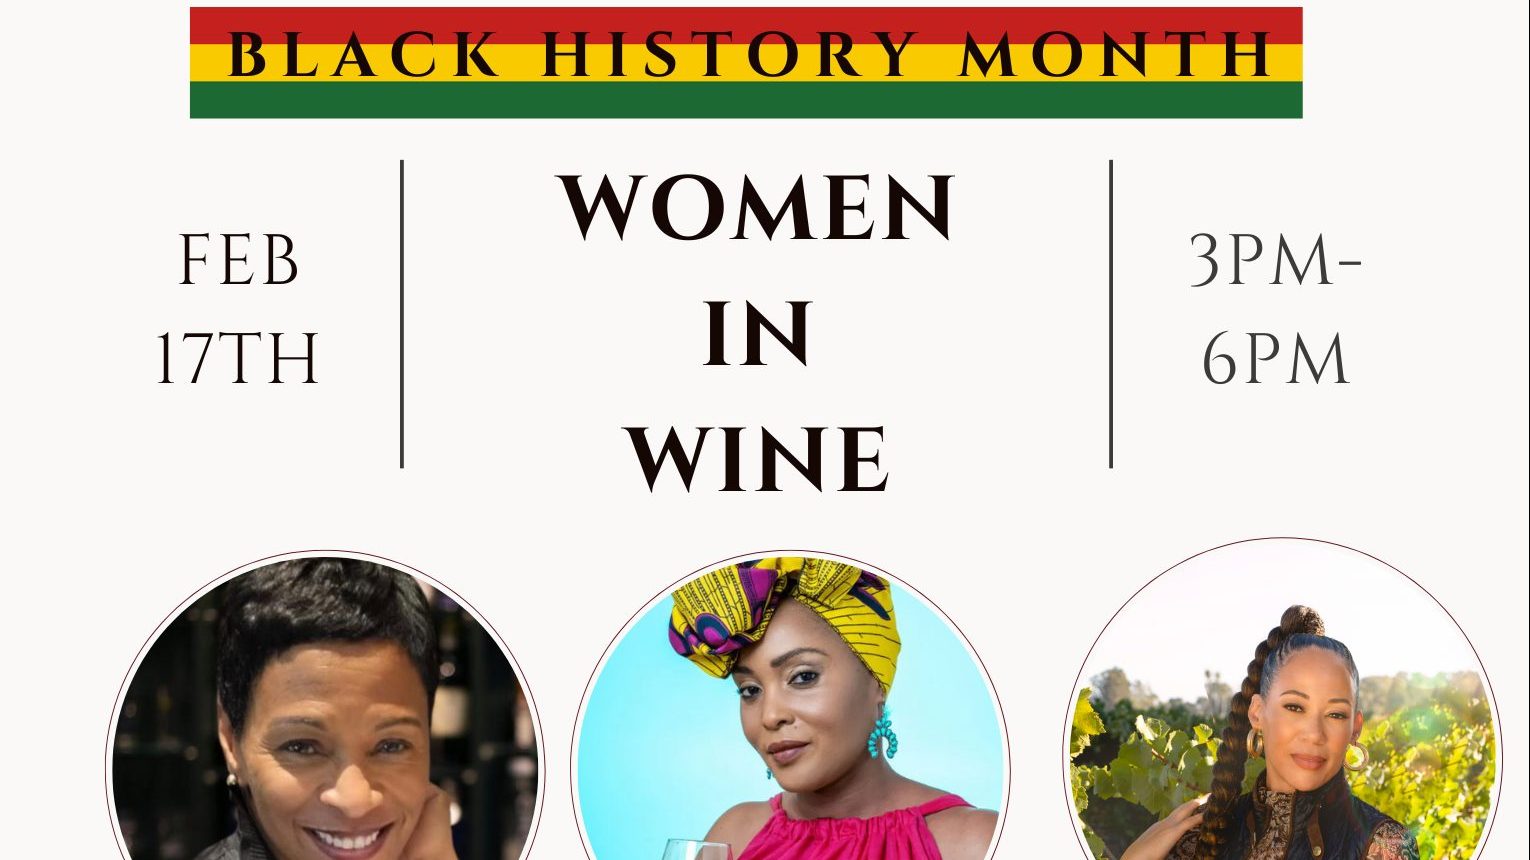 Black History Month Women in Wine event